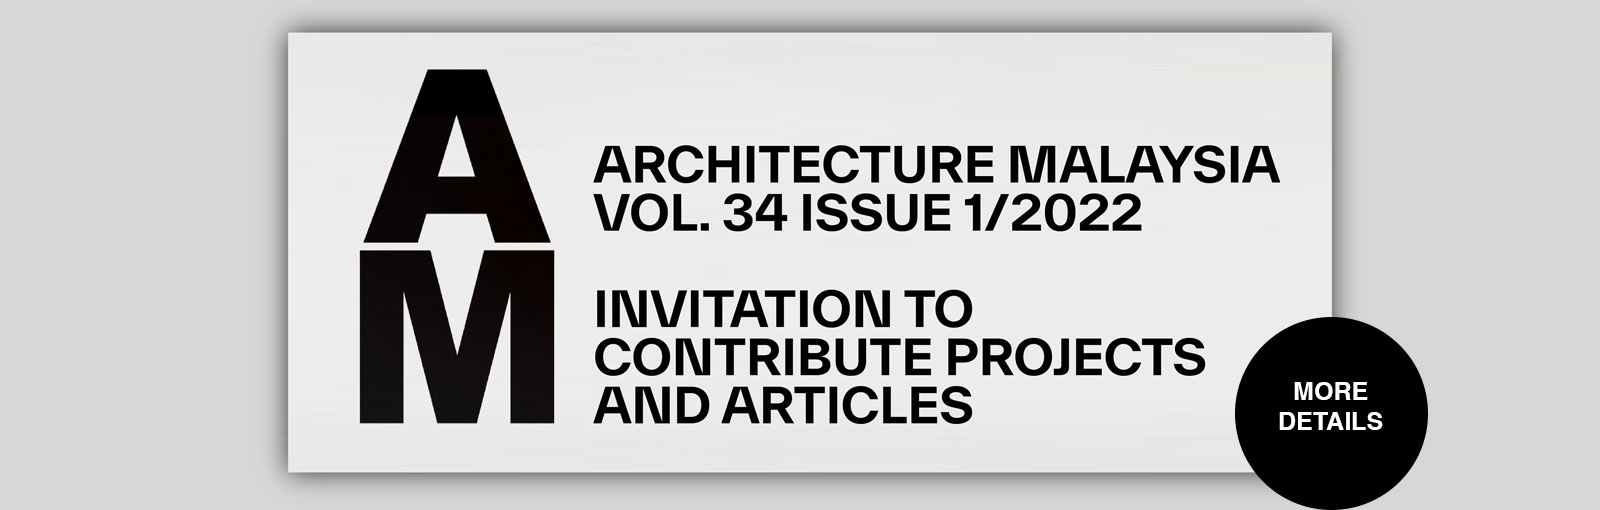 Invitation To Contribute Projects And Articles For The New AM Magazine